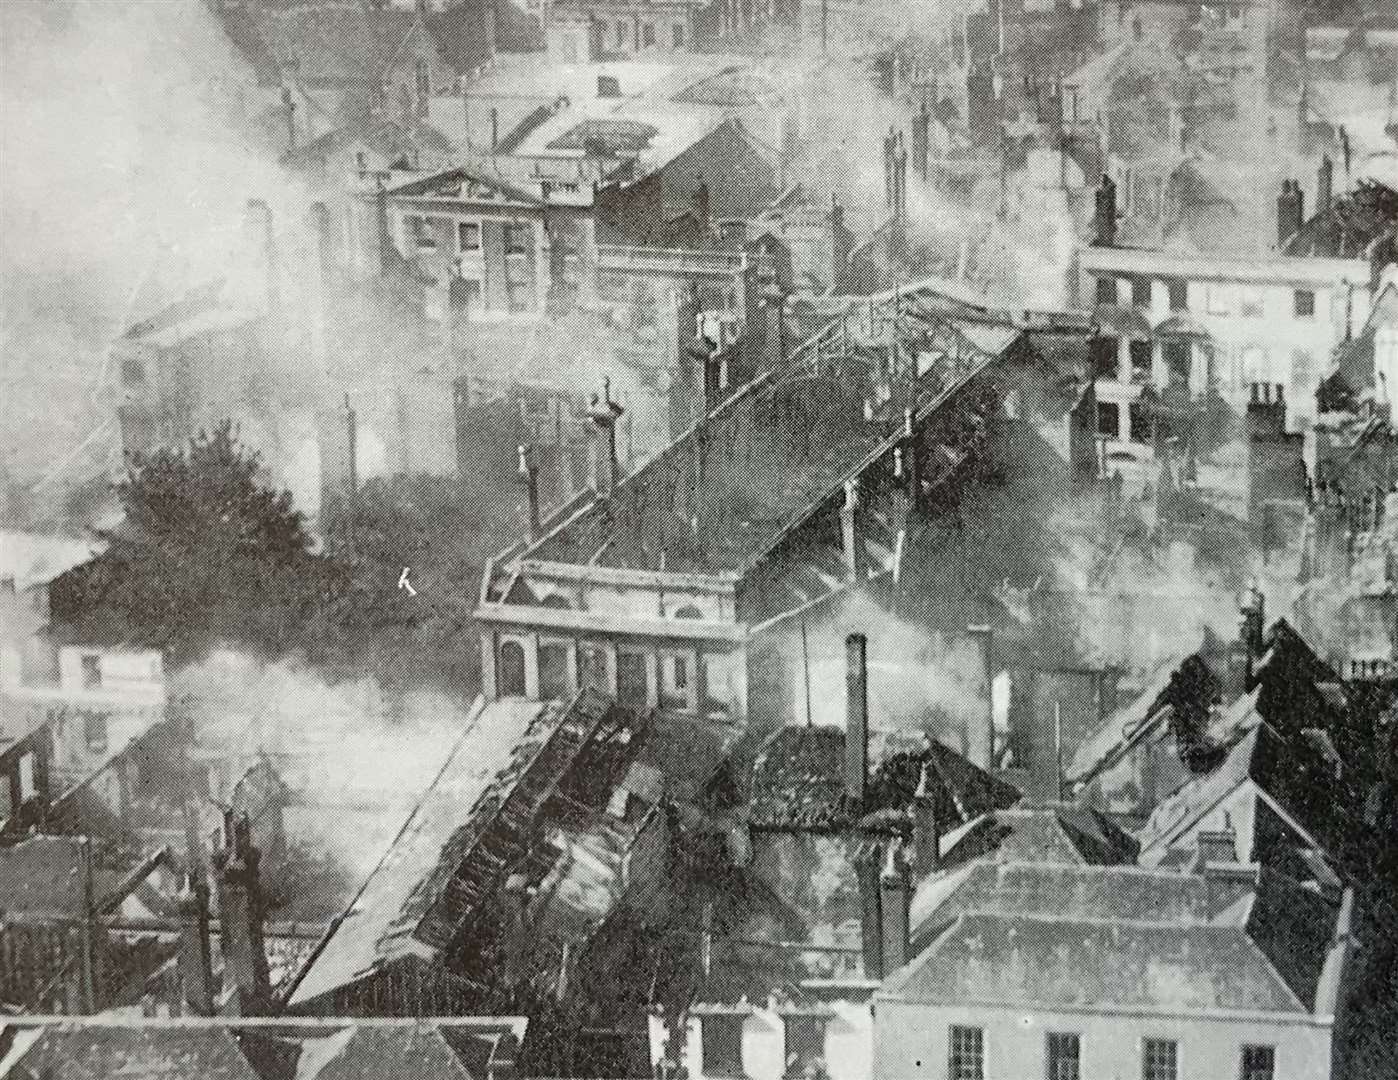 The scene of destruction after the bombing raid of June 1, 1942, when most of St George's Street was destroyed. The classical front of Marks & Spencer can be seen in the centre of the picture, which shows other parts of the city smouldering. Picture: Neil Mattingly